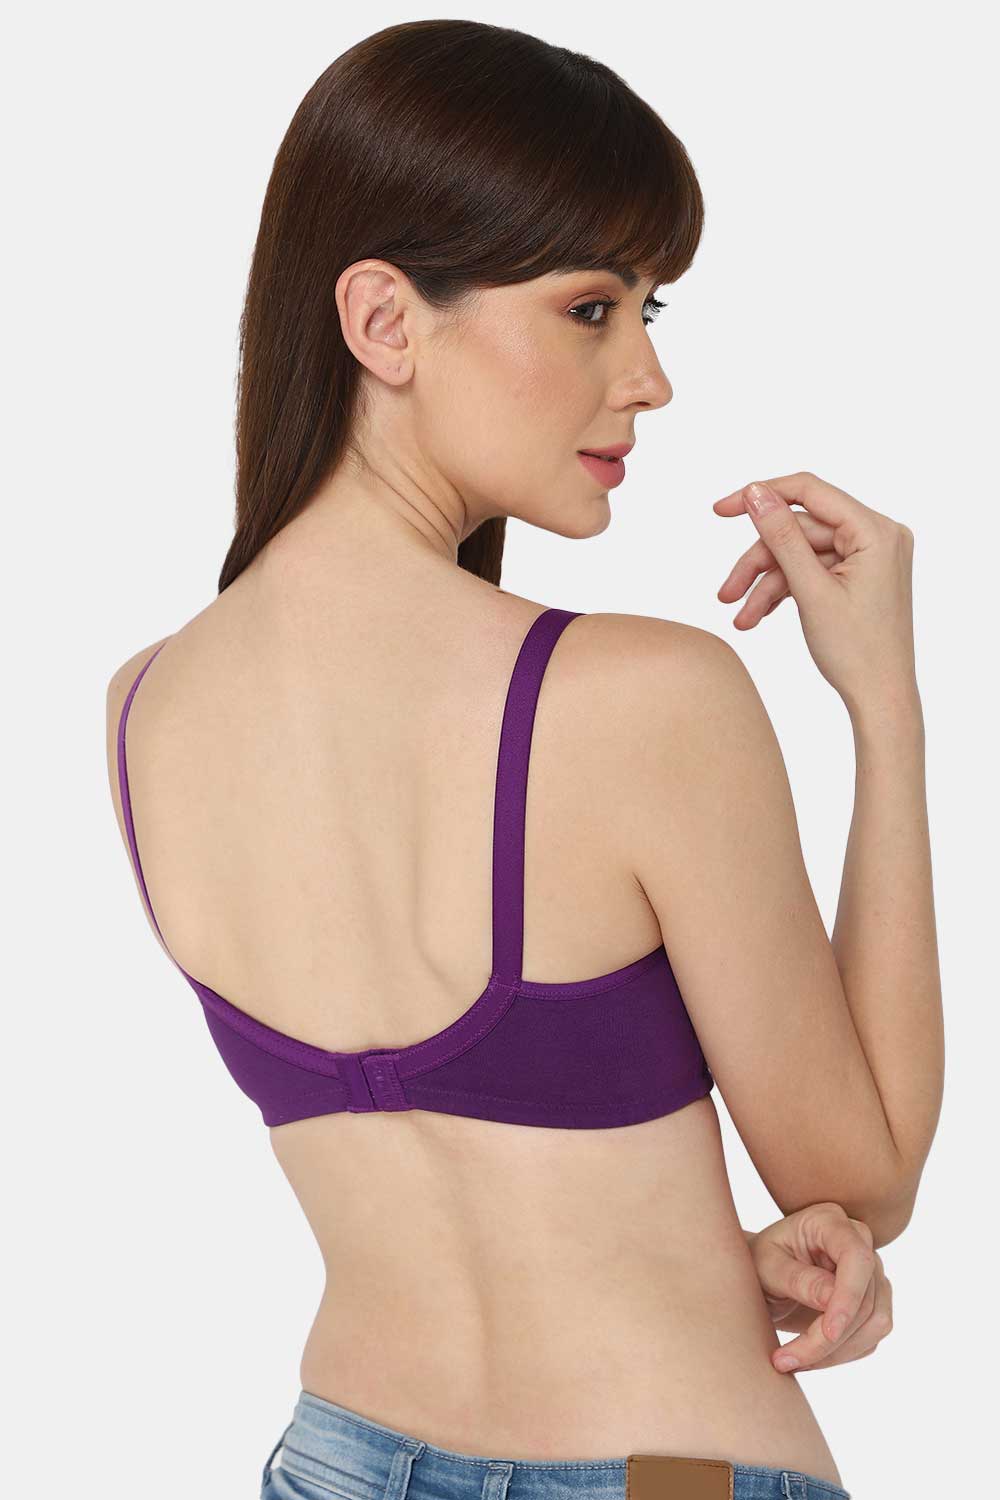 Enamor Shaper T-shirt bra for womens-Non Padded, non wired, high coverage  with moulded cups